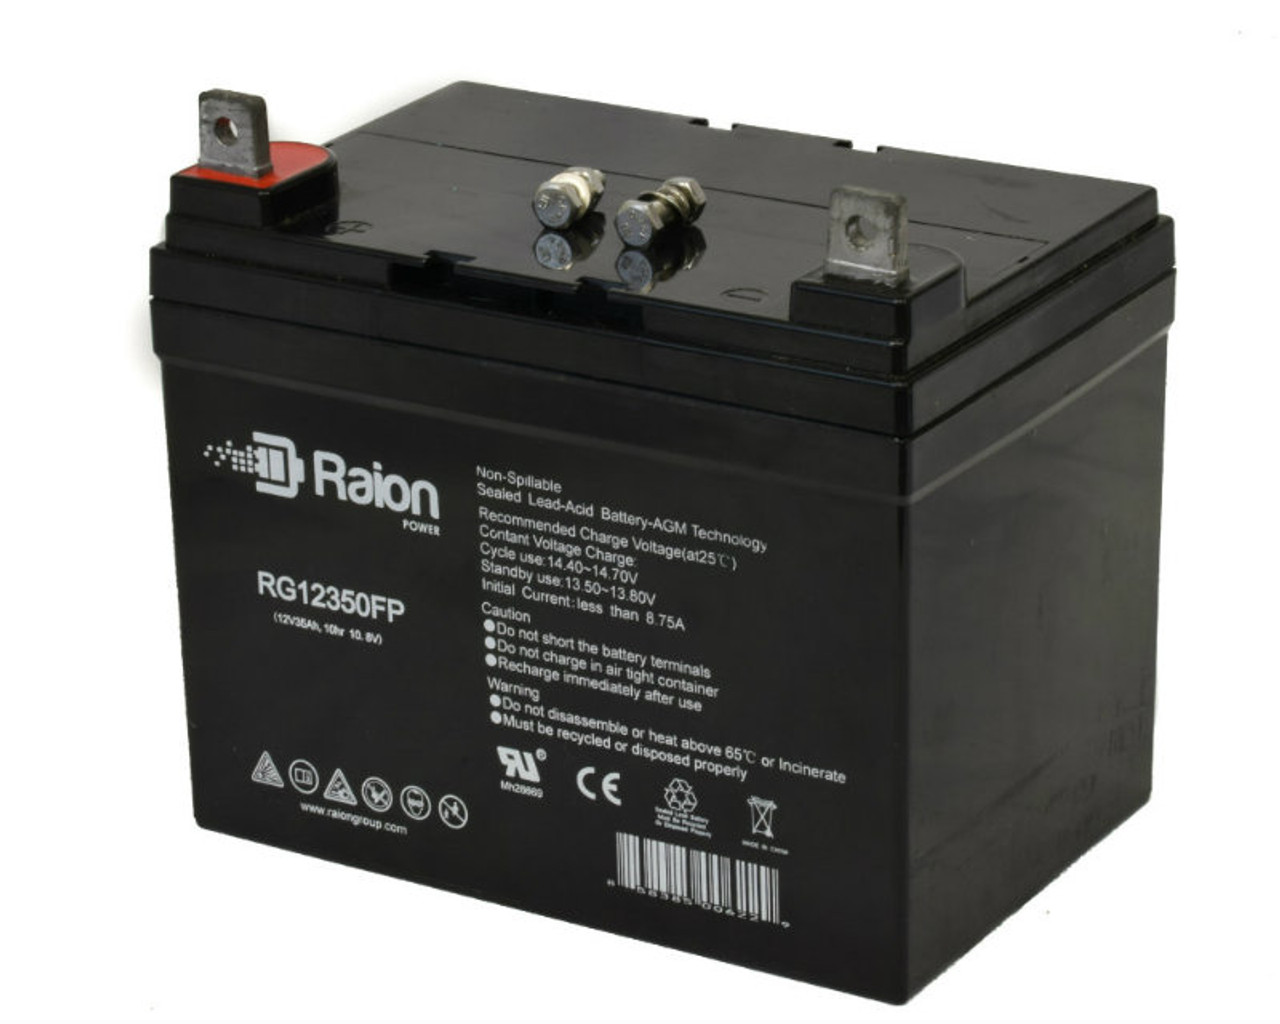 Raion Power Replacement 12V 35Ah Battery for Agco Allis 1723H - 1 Pack